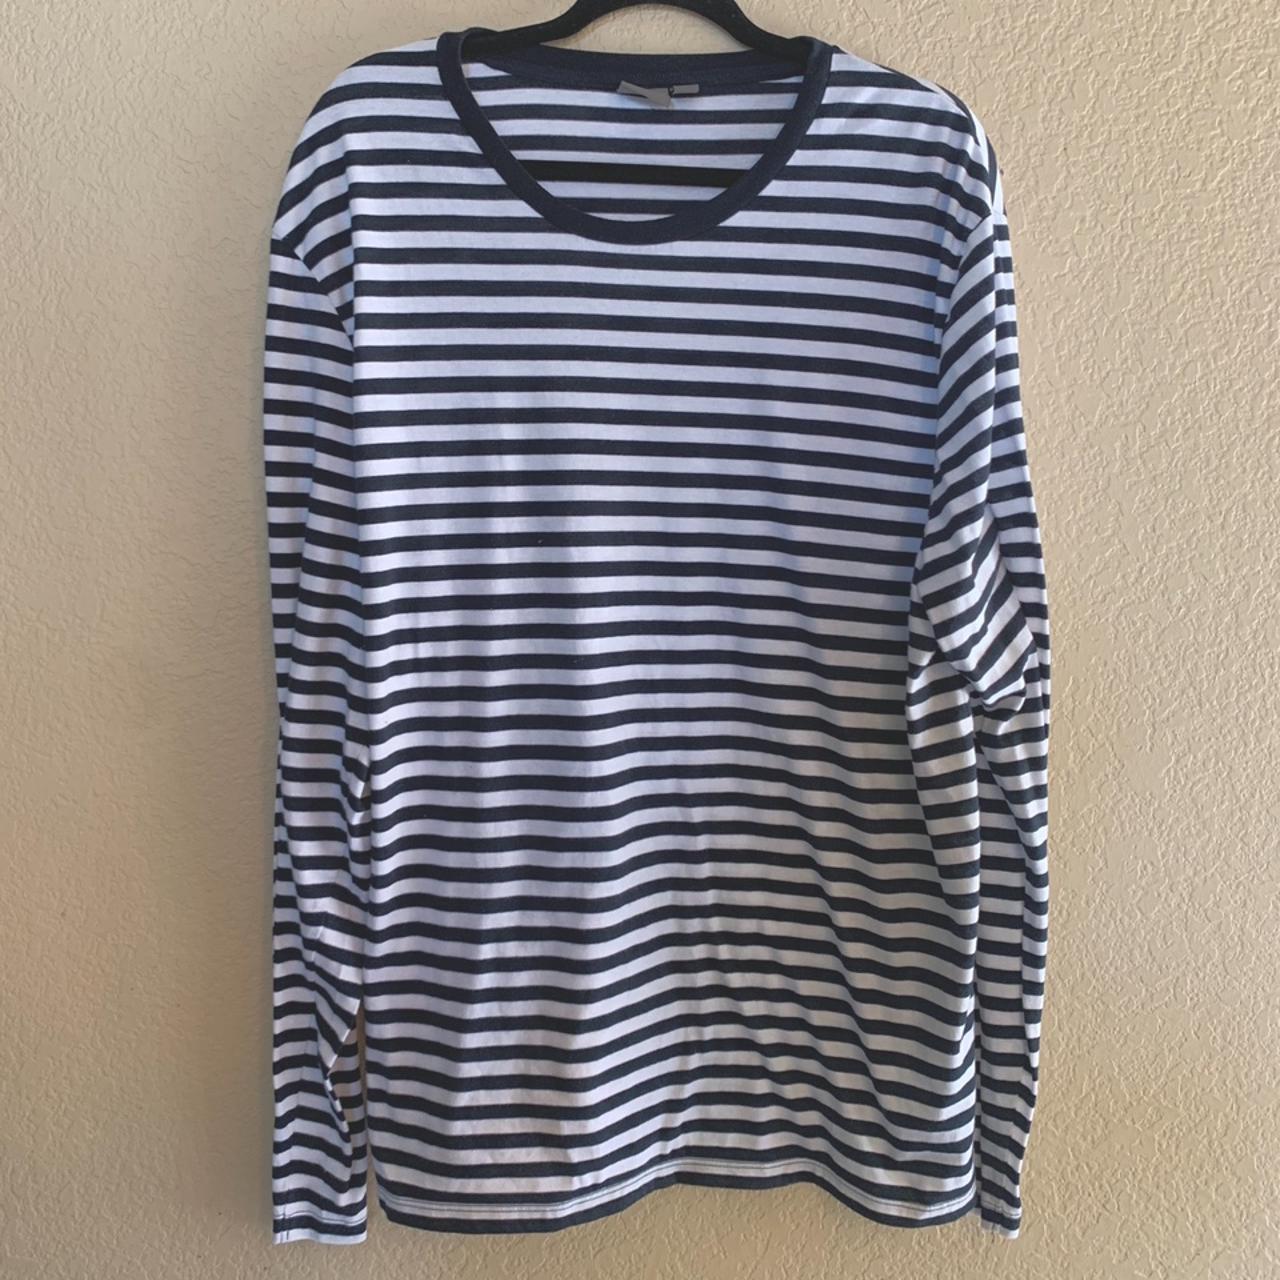 Horizontal Blue and White Stripped Shirt Great... - Depop